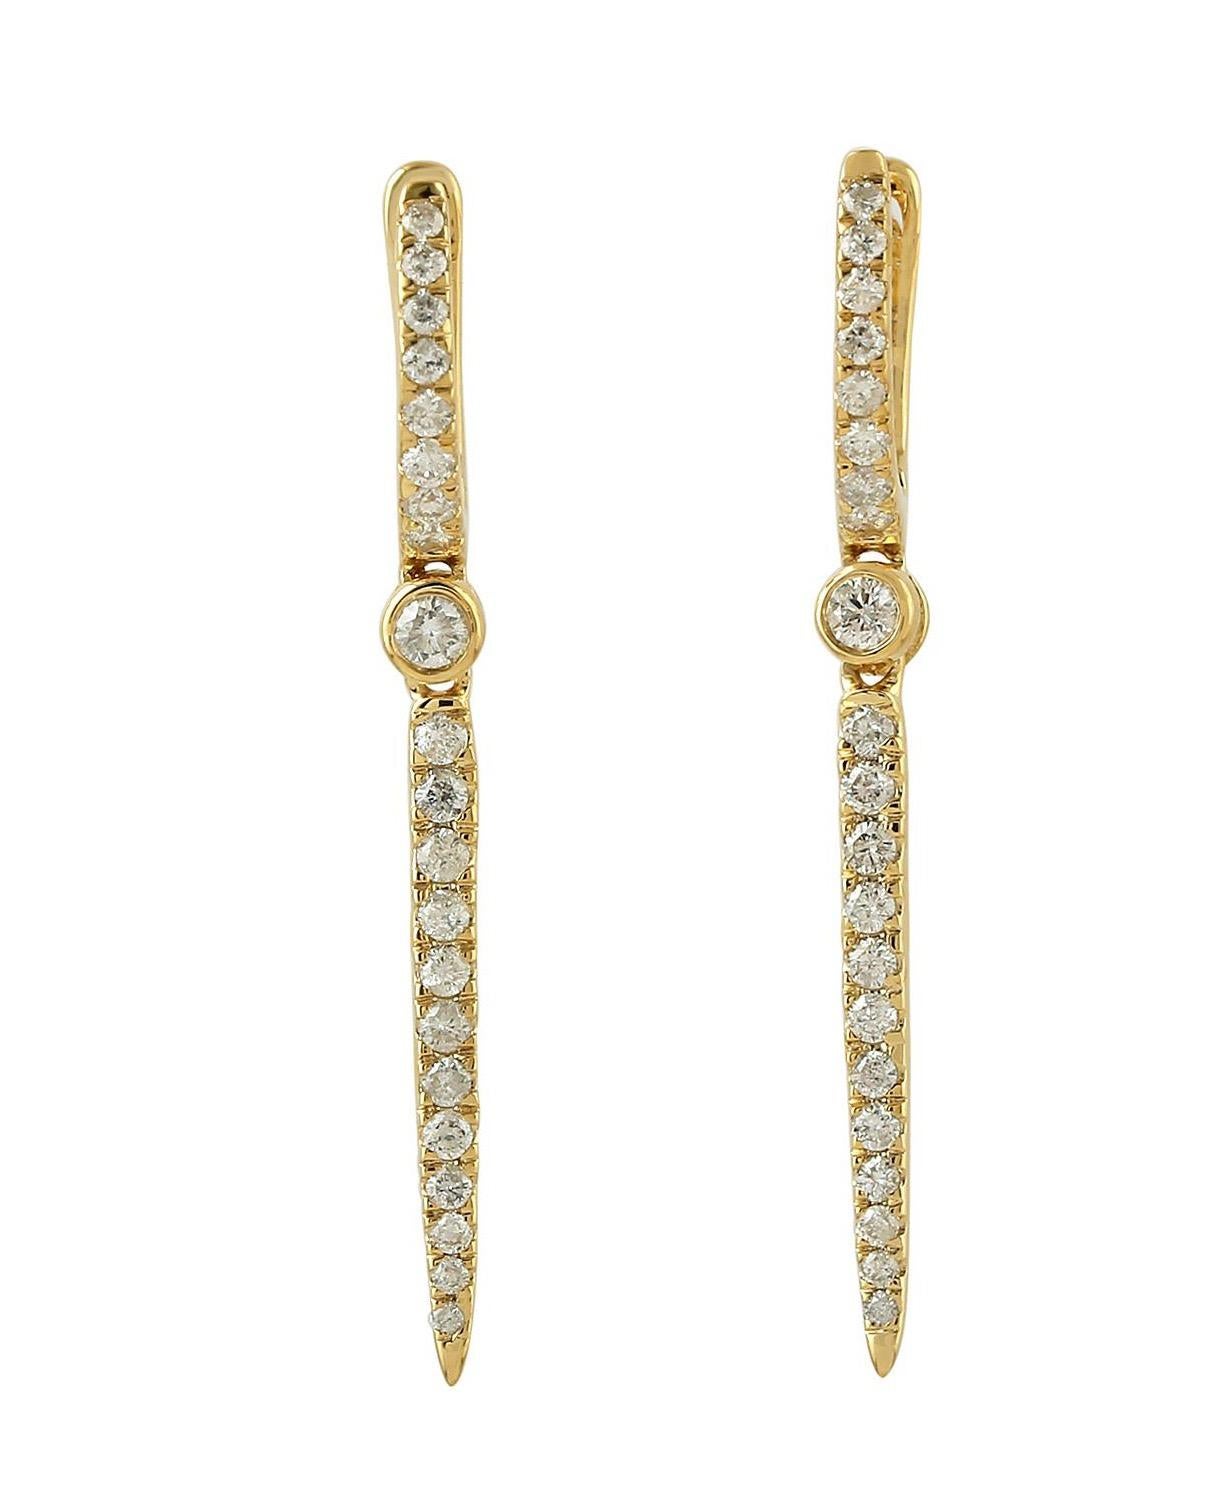 Handcrafted from 14-karat gold, these beautiful linear hoop drop earrings are set with .49 carats of sparkling diamonds. Also available in white gold & rose gold.

FOLLOW  MEGHNA JEWELS storefront to view the latest collection & exclusive pieces. 